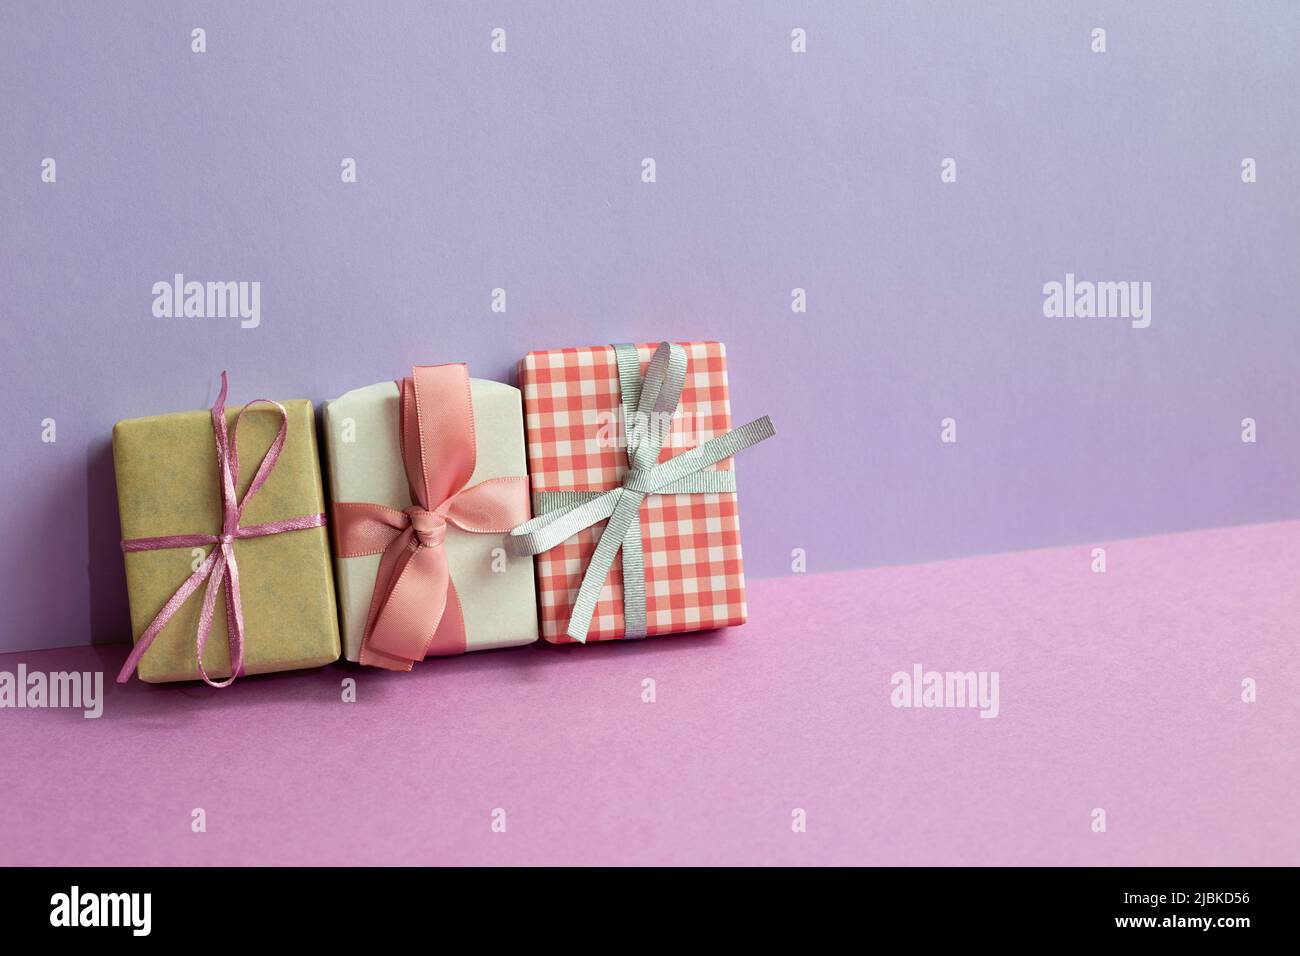 Gift boxes on purple table. purple wall background. copy space Stock Photo